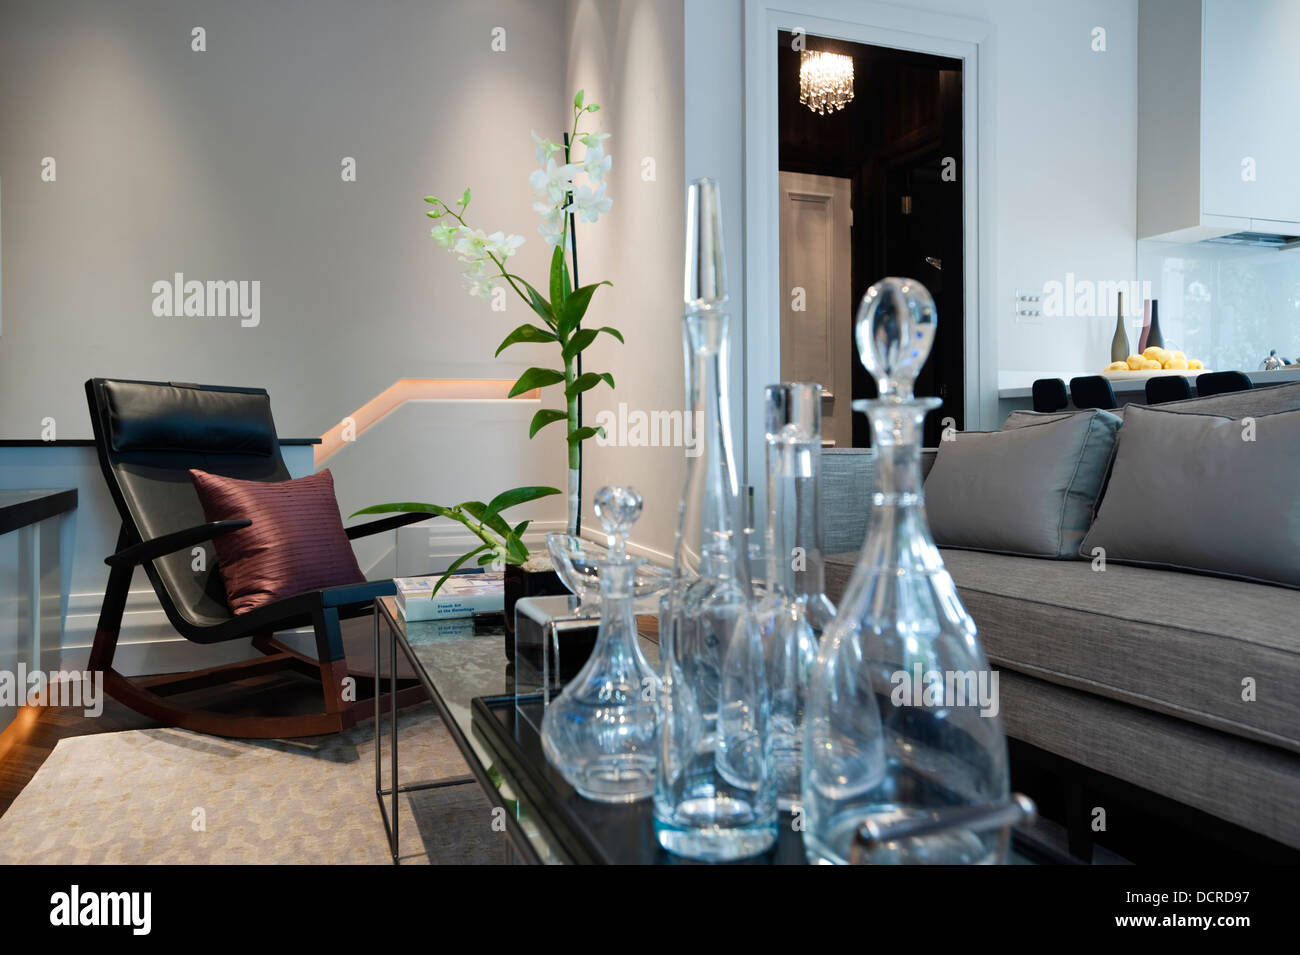 Seating area with glass decanters in London city apartment Stock Photo